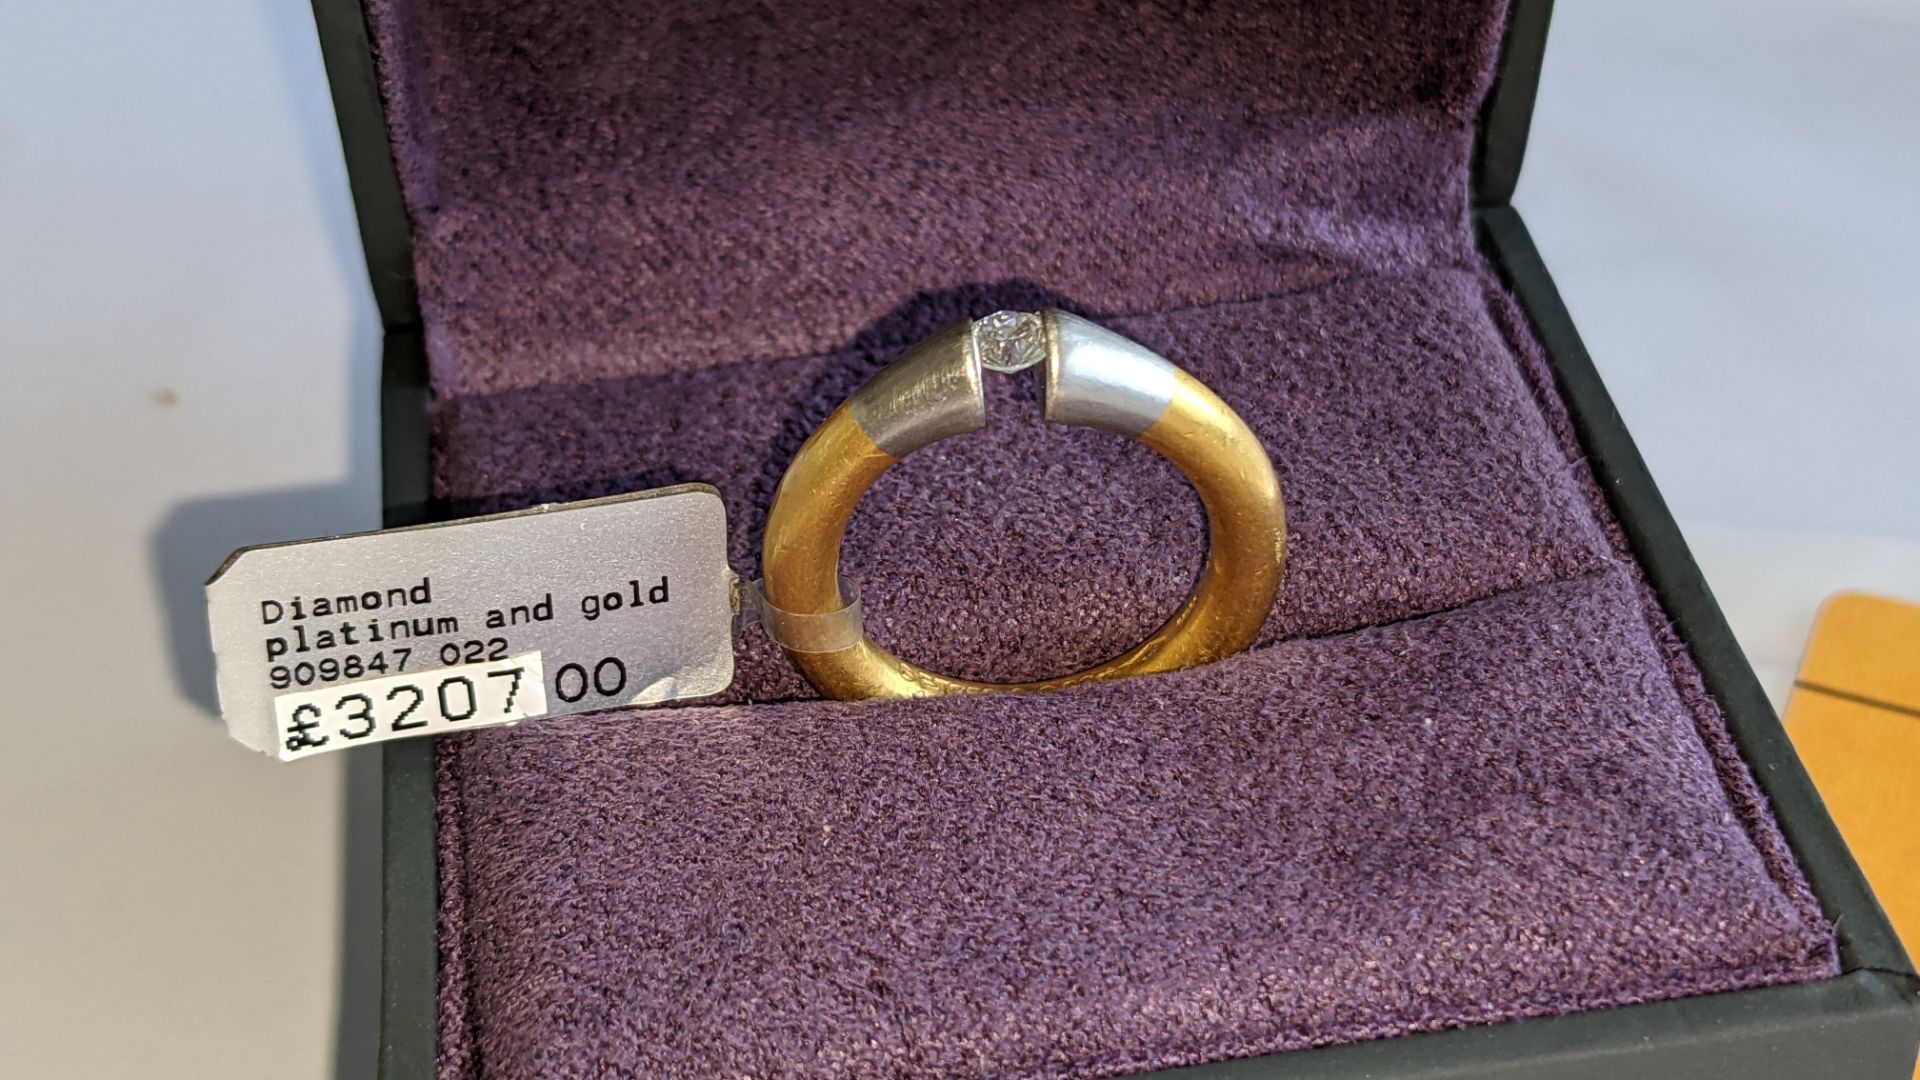 Platinum & yellow gold ring with 0.22ct central brilliant cut diamond. RRP £3,207 - Image 7 of 14